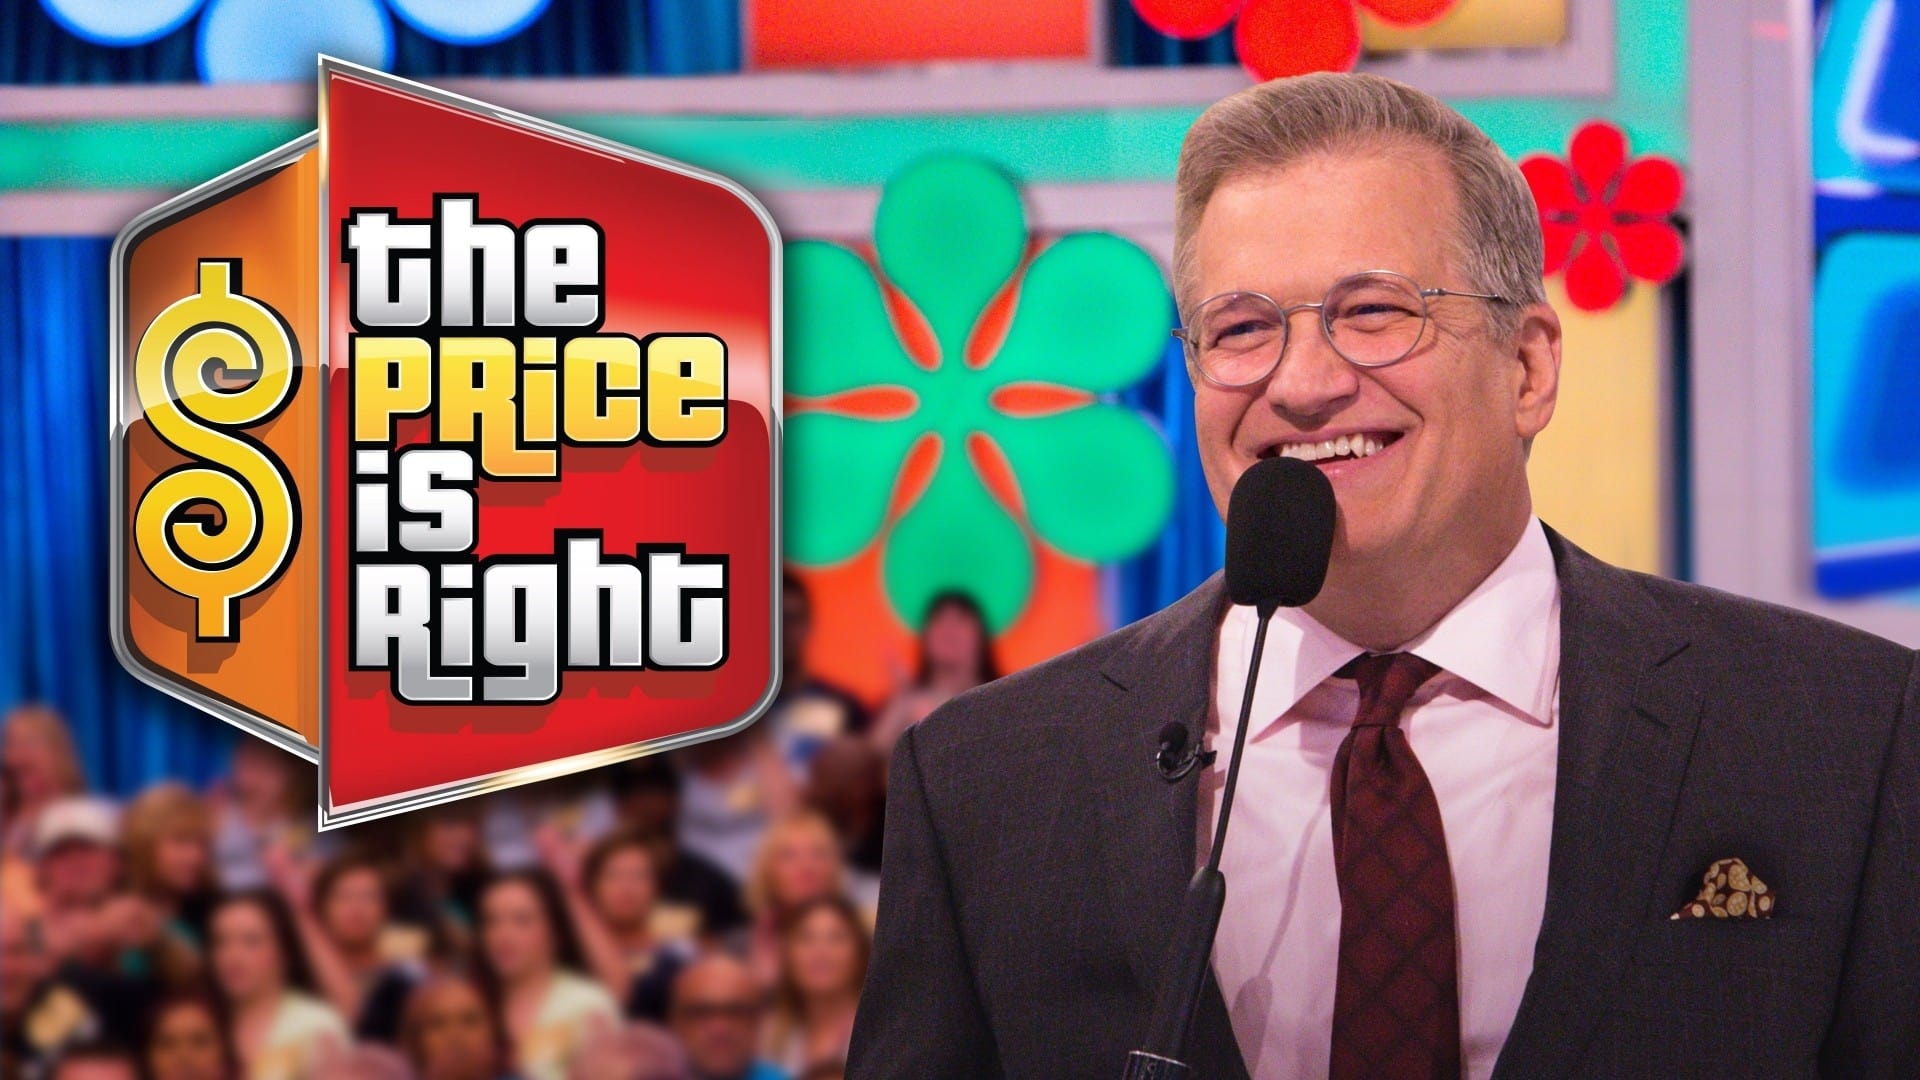 The Price Is Right - Season 3 Episode 122 : The Price Is Right Season 3 Episode 122